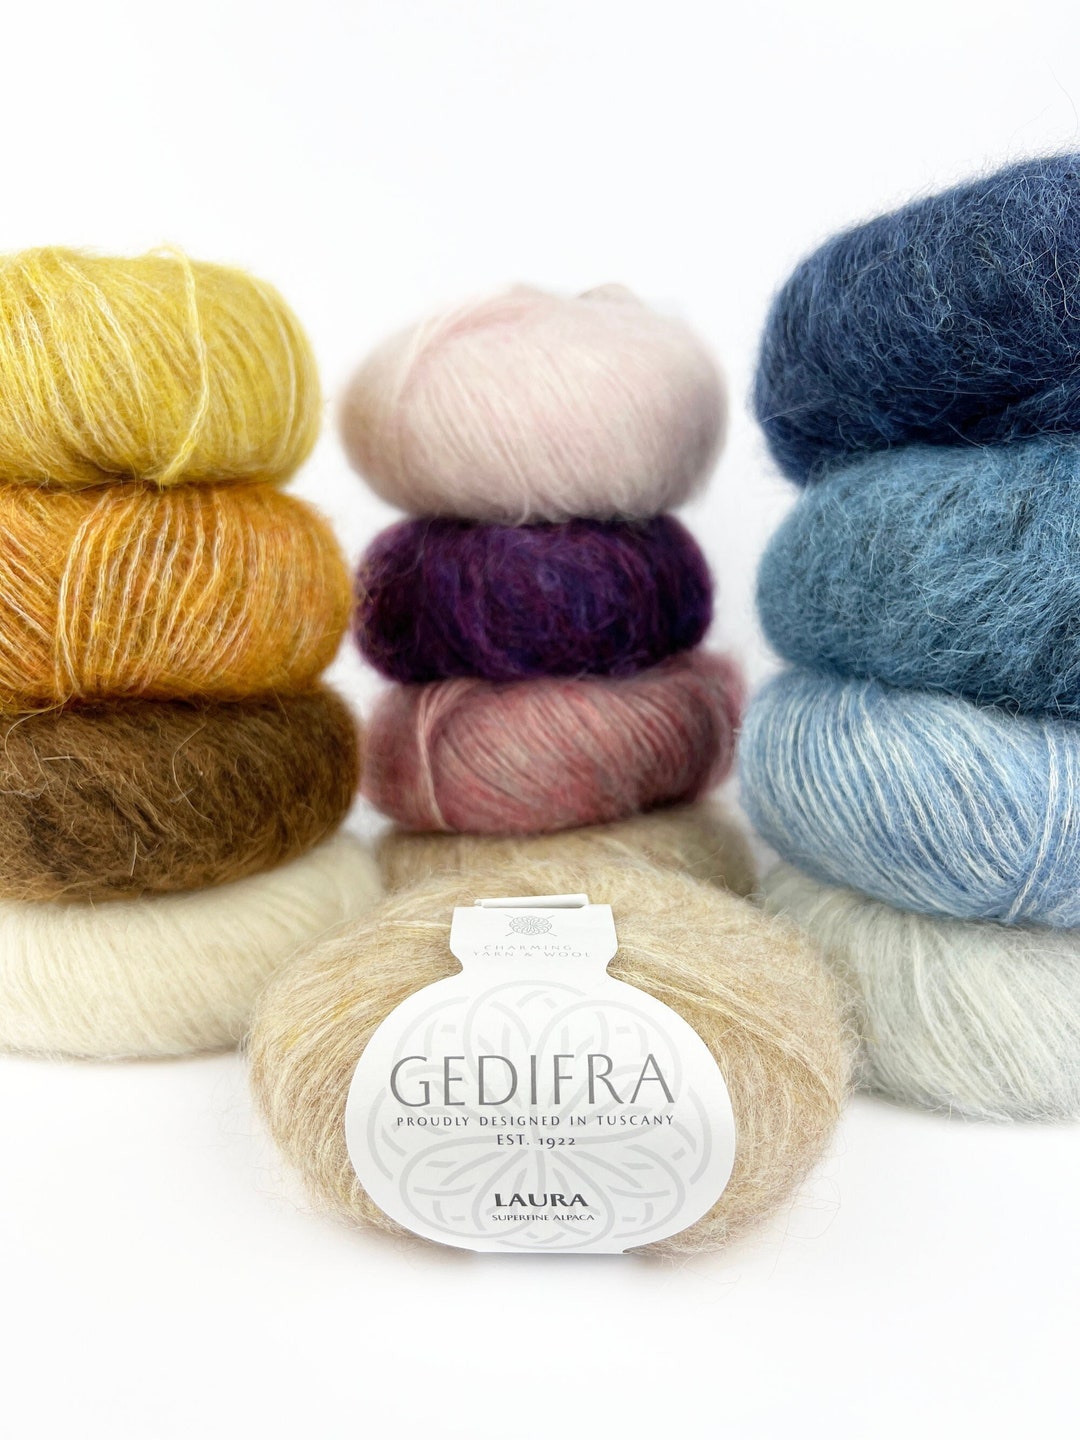 Gedifra Laura, Superfine Alpaca and Cotton, 150m/25g, Soft Lace Yarn for  Knitting and Crochet 